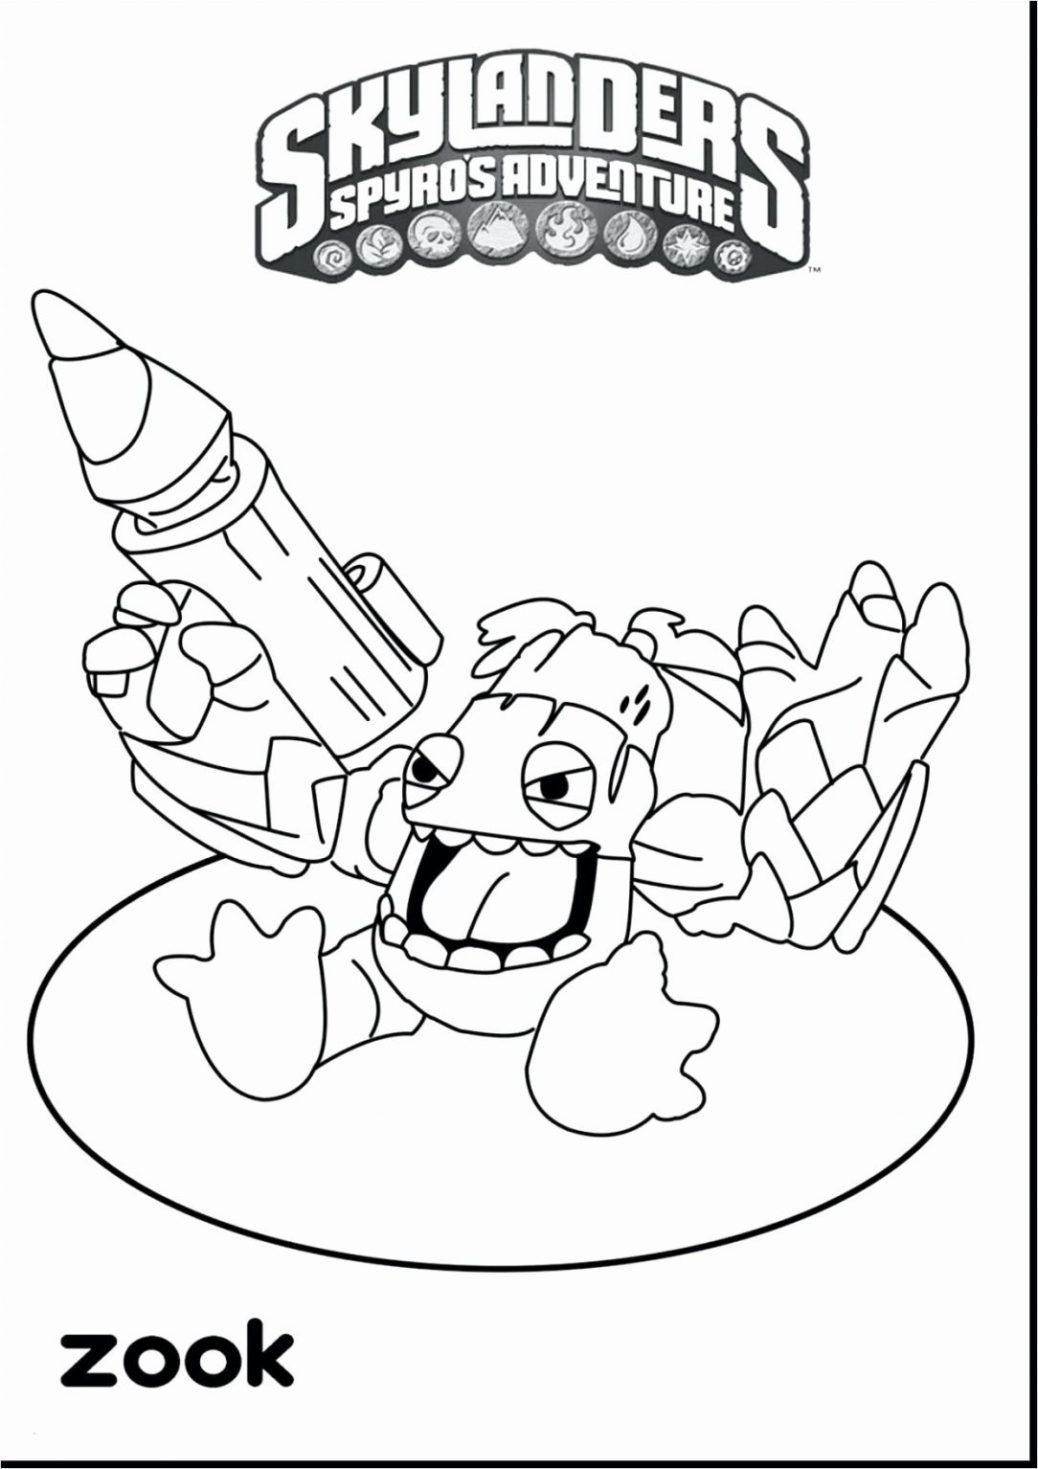 Customized Coloring Pages Coloring Extraordinarying Coloring Book Photo Inspirations Ideas